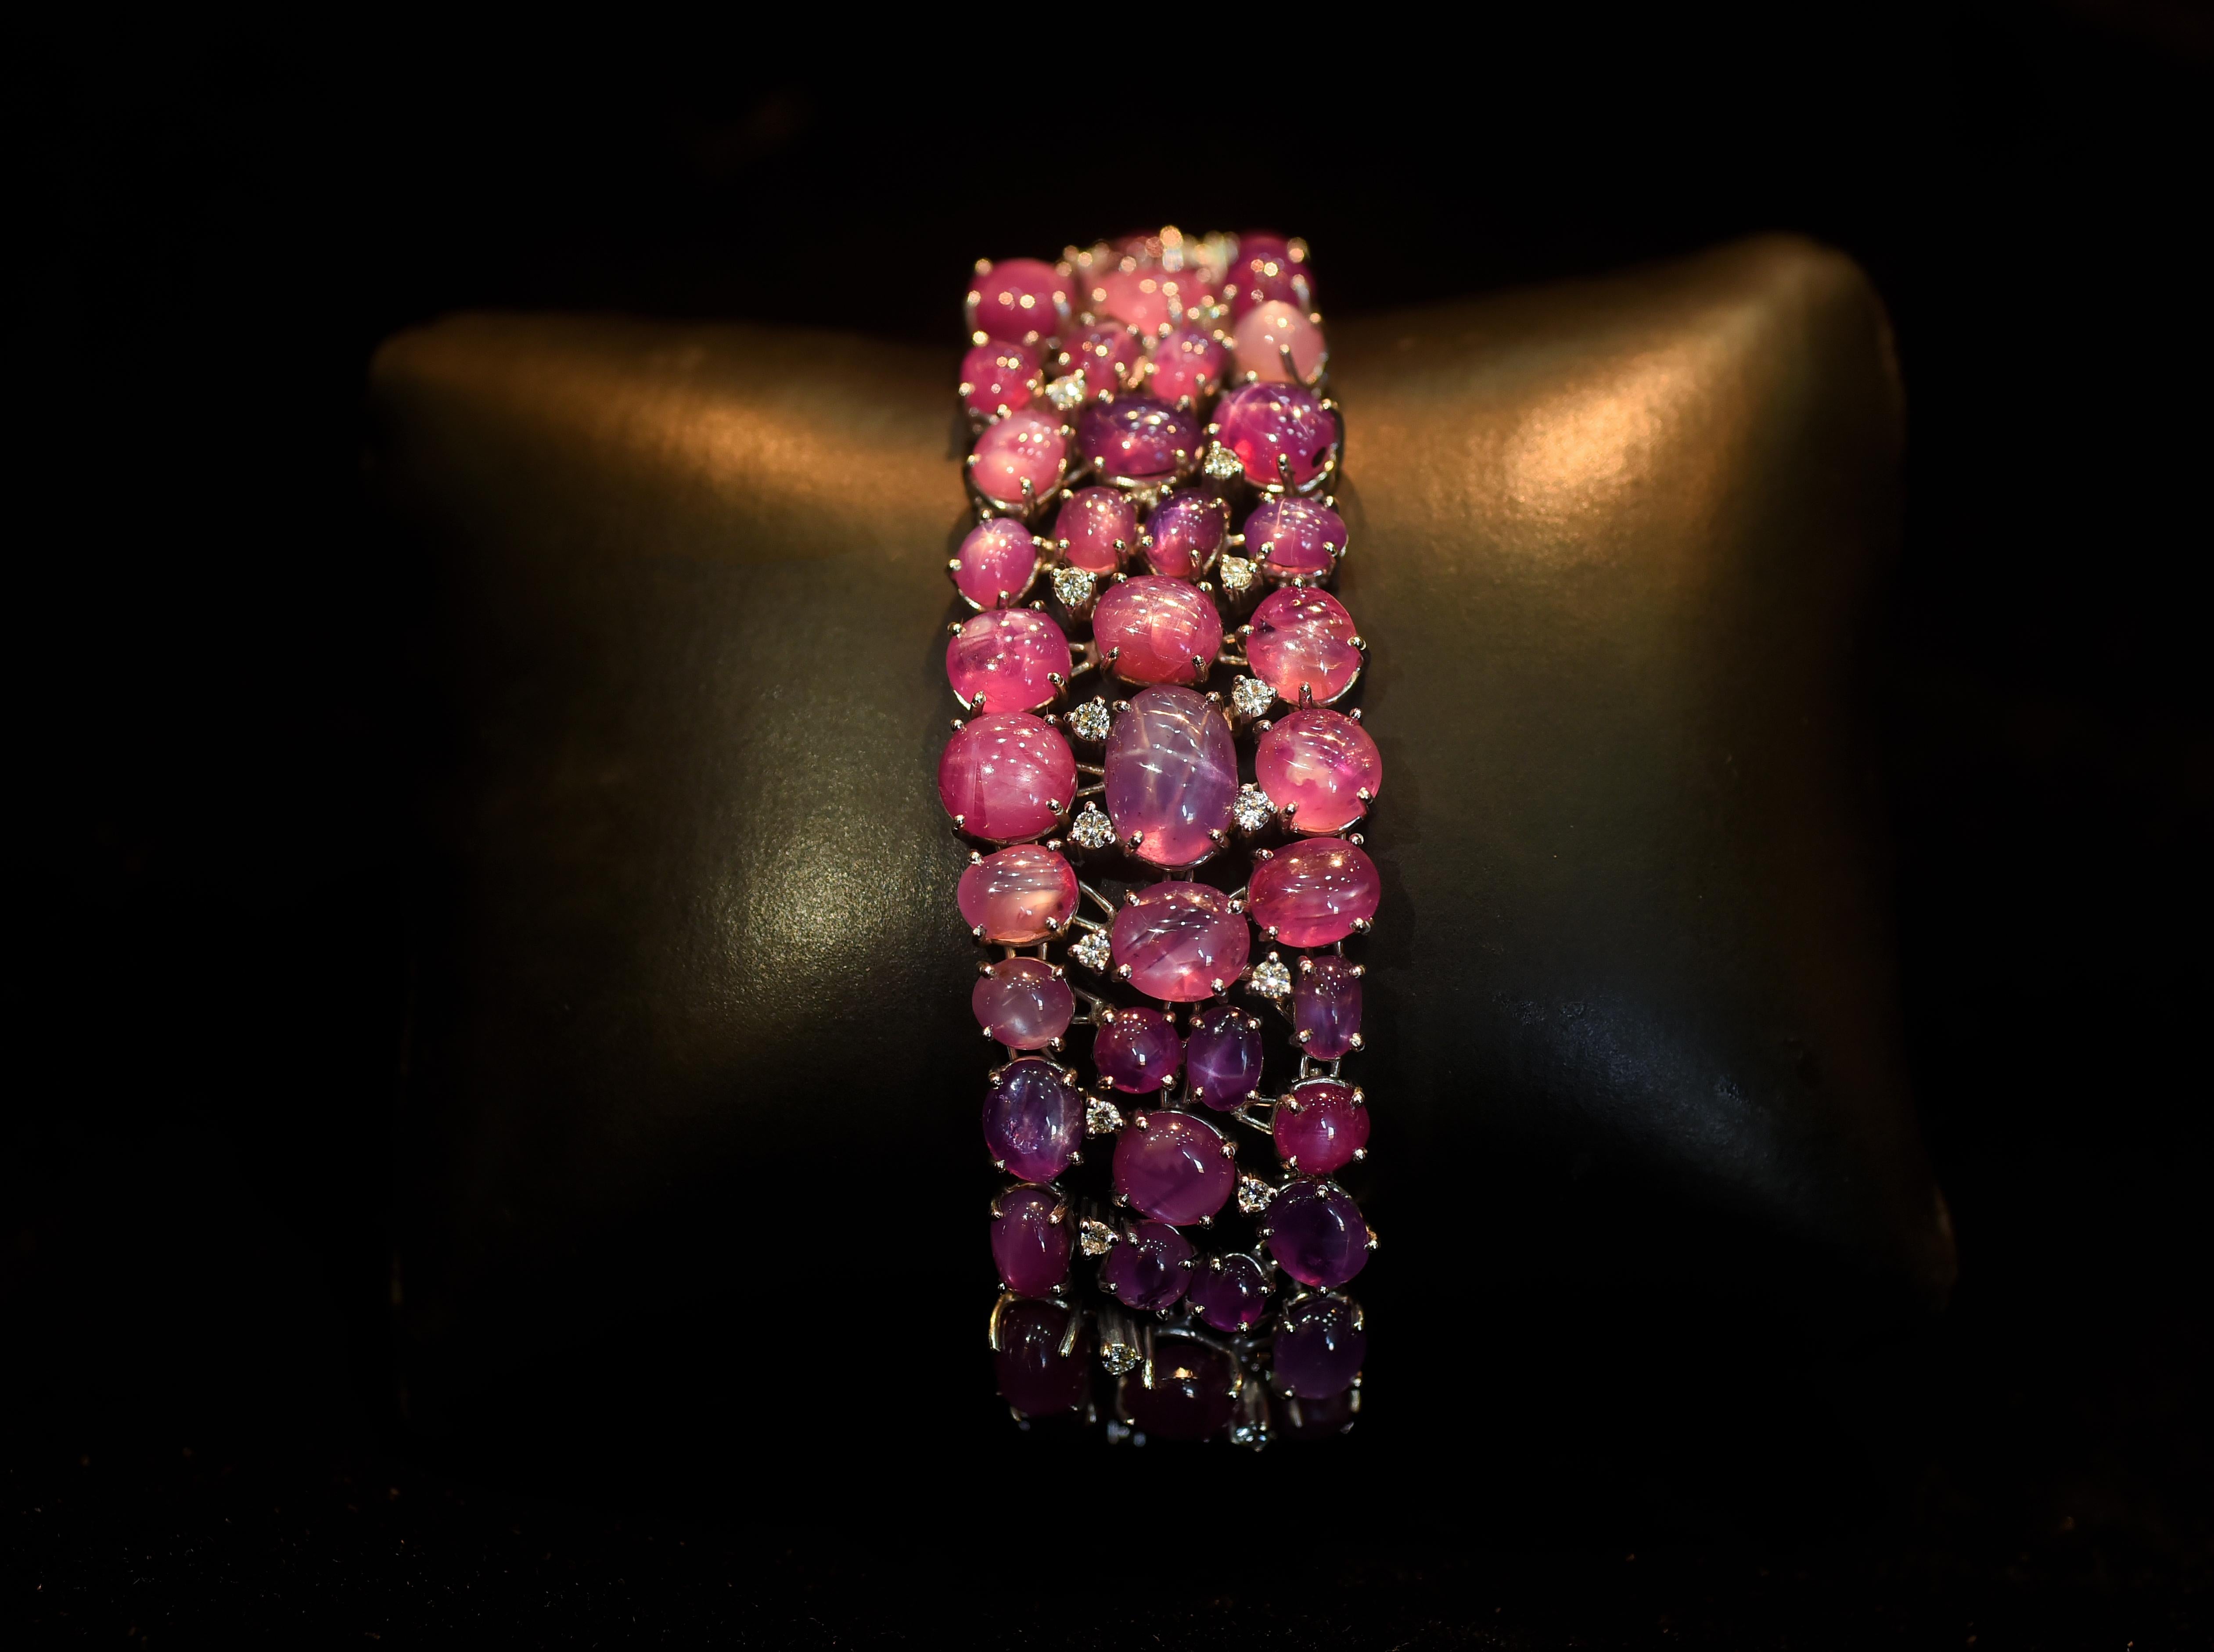 A gorgeous and one of a kind, Pink & Purple Star Ruby Bracelet set in 18K Gold & Diamonds. Star Ruby is a rare rarity of Ruby that exhibits a rare asterism (a six-rayed star) floating across the stone under specific lighting. The Star Ruby is